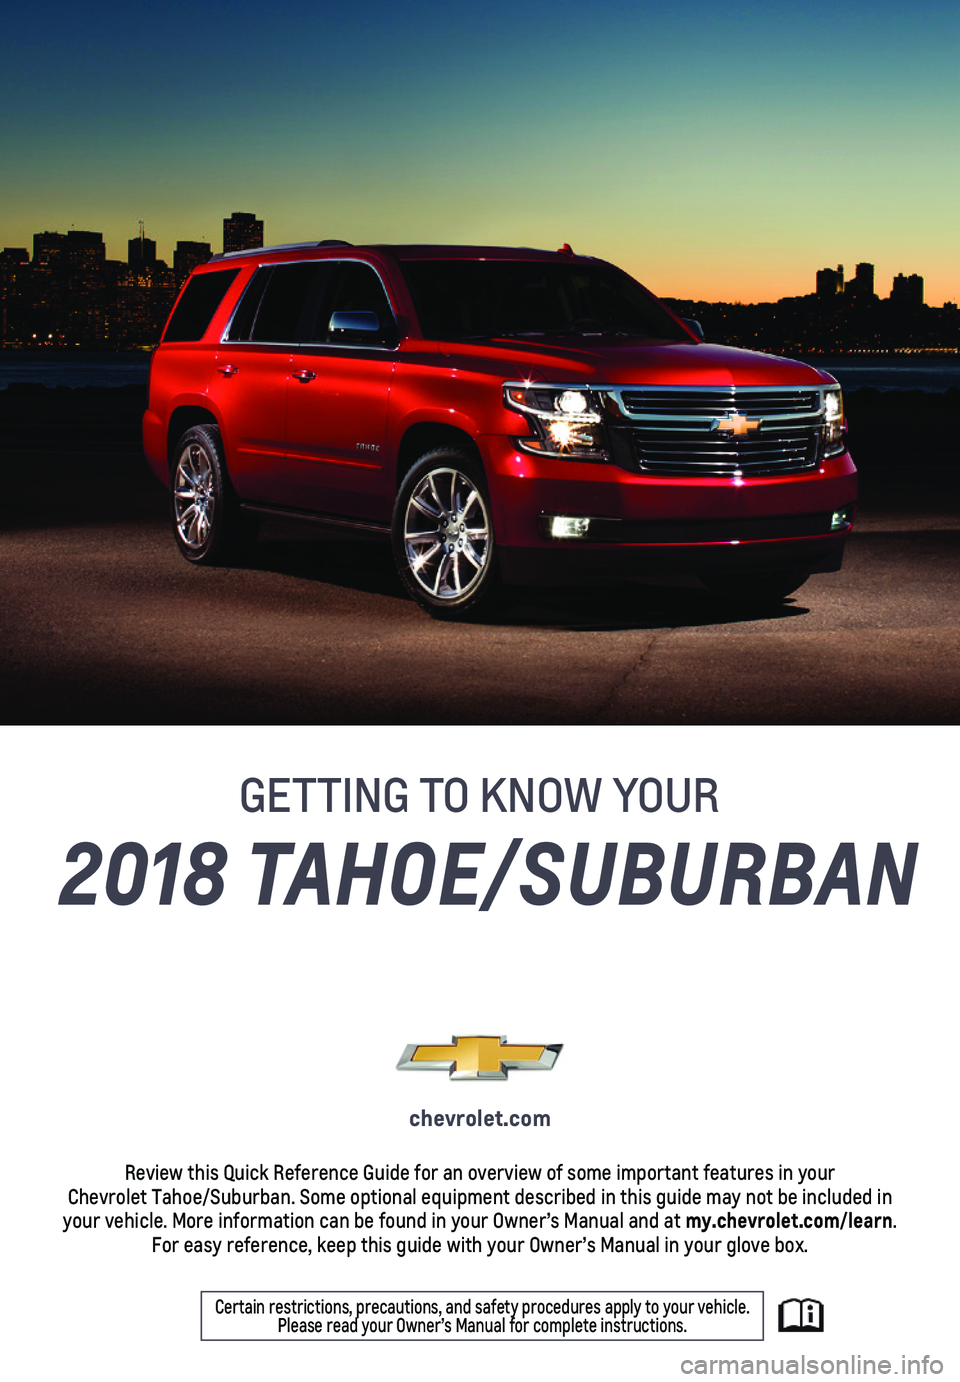 CHEVROLET TAHOE 2018  Get To Know Guide 1
2018 TAHOE/SUBURBAN
chevrolet.com
Review this Quick Reference Guide for an overview of some important feat\
ures in your  Chevrolet Tahoe/Suburban. Some optional equipment described in this guid\
e 